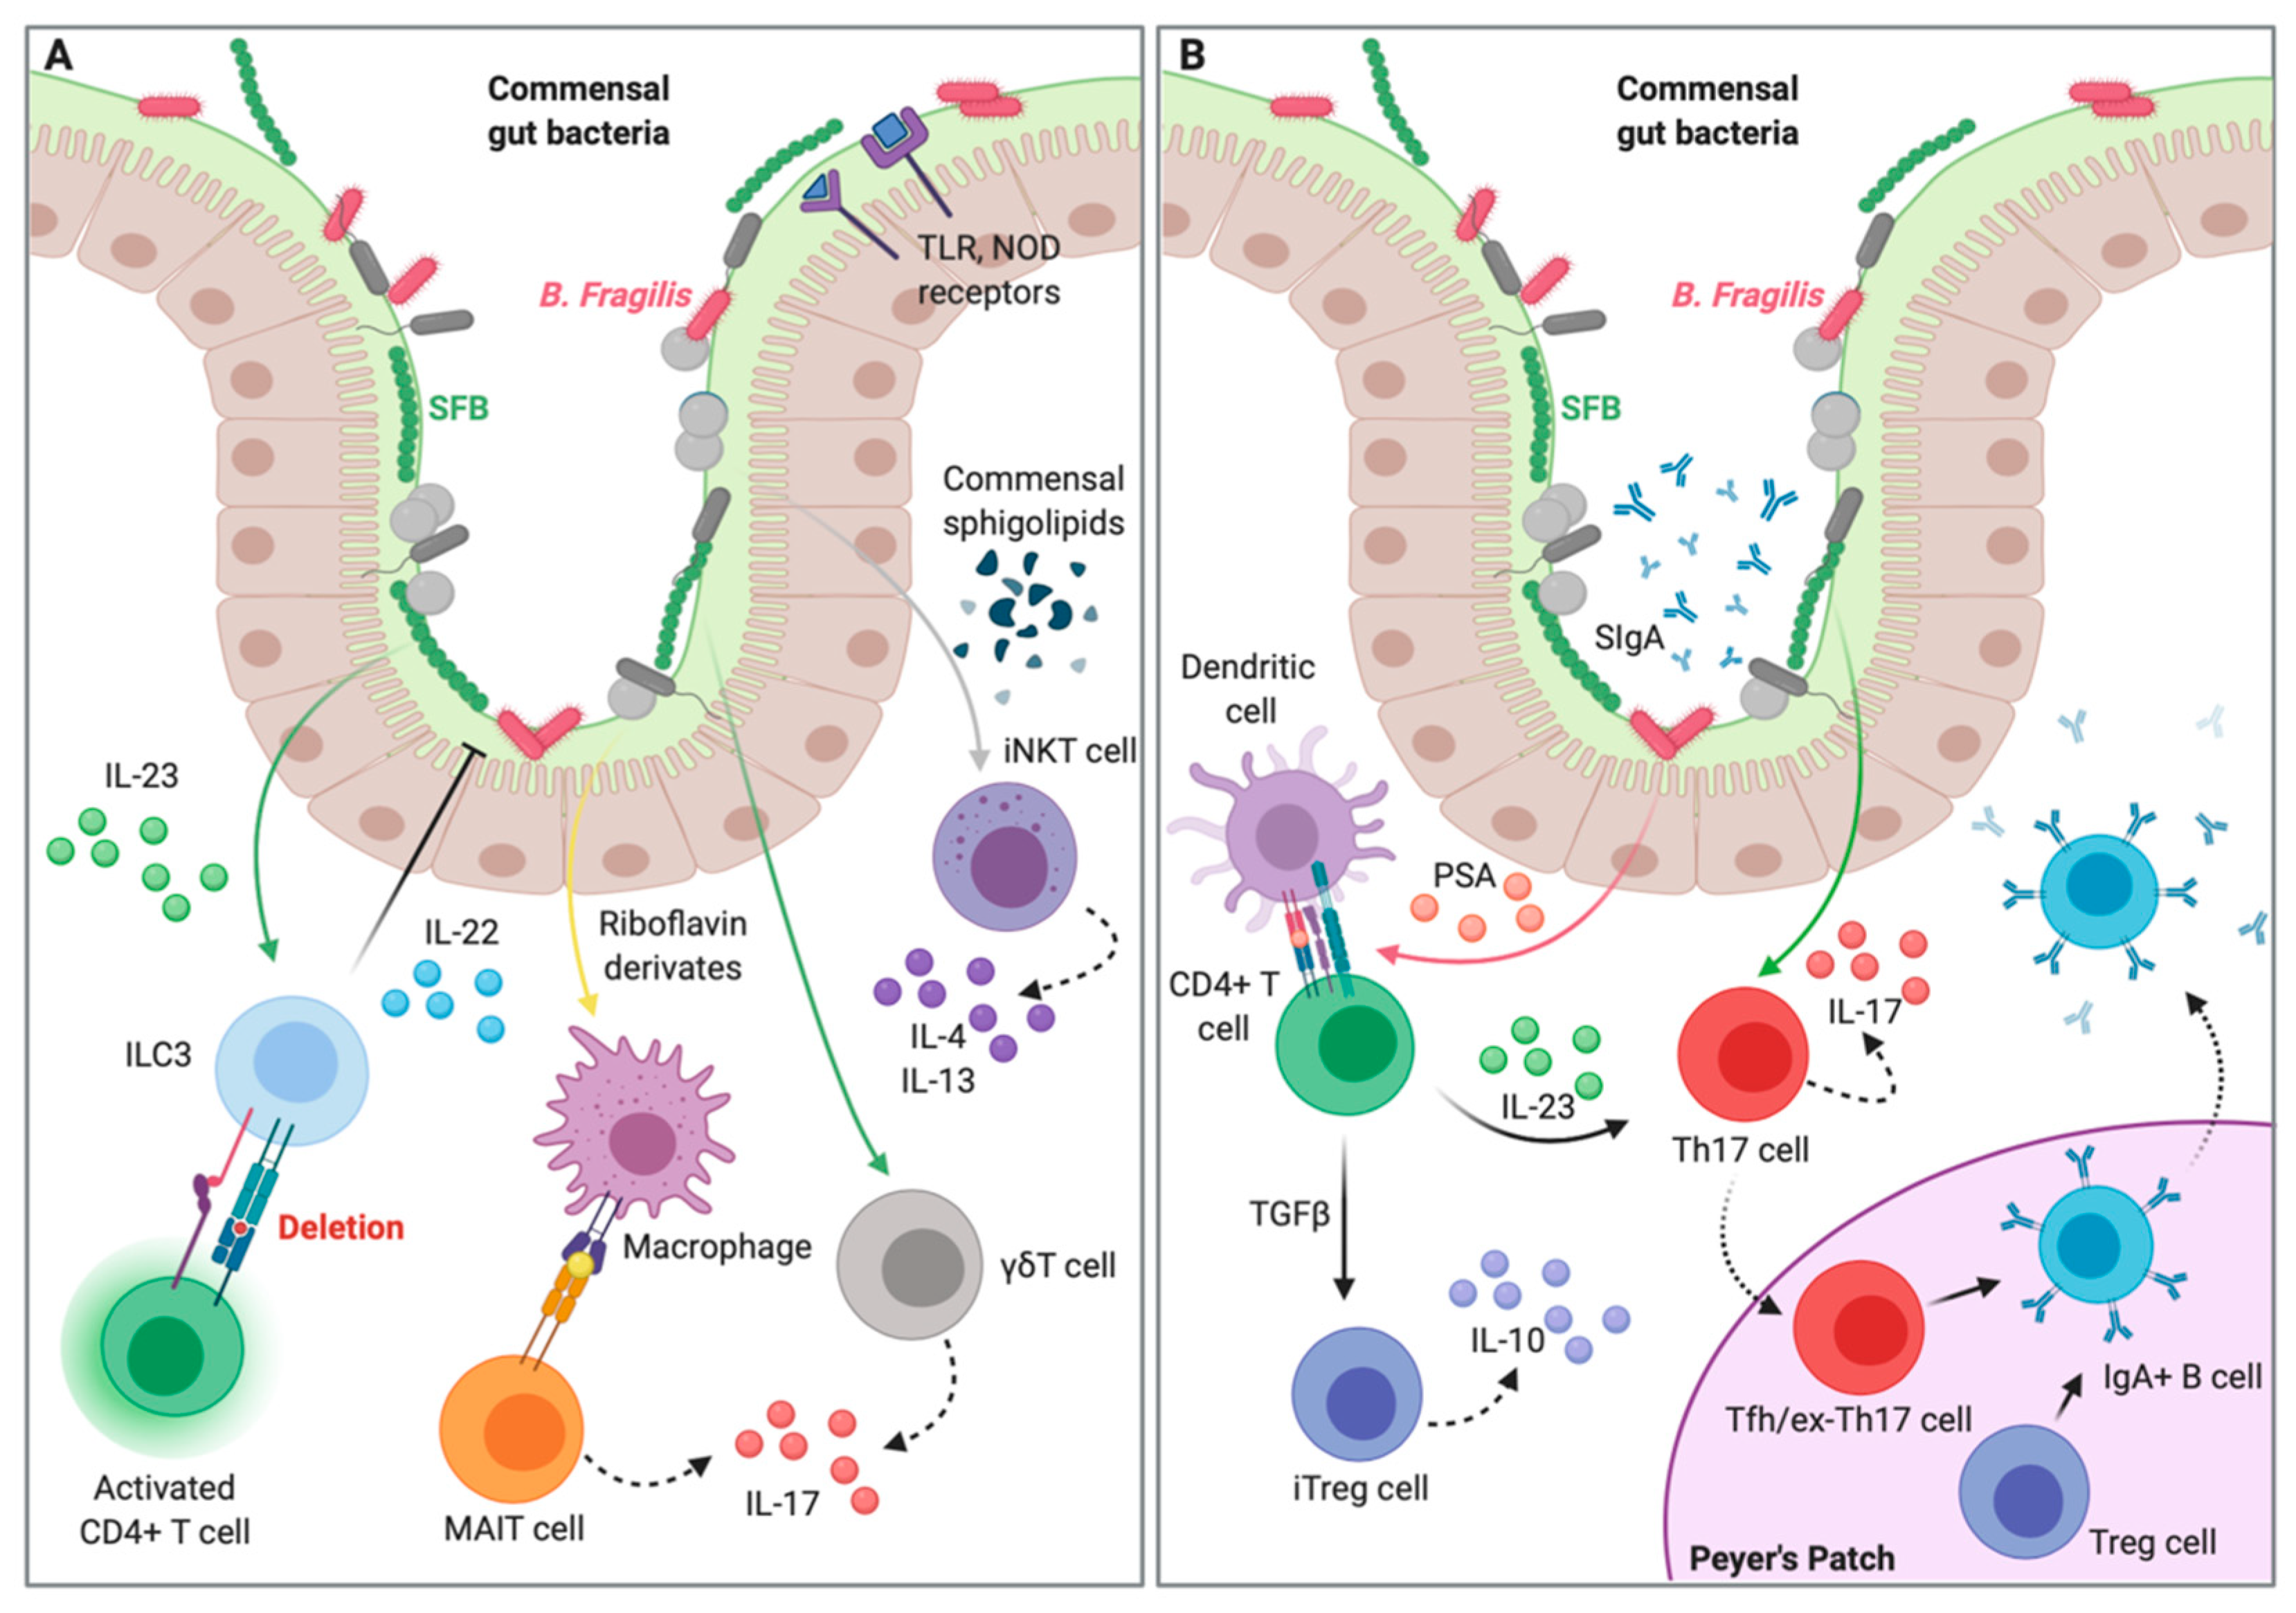 The systemic anti-microbiota IgG repertoire can identify gut